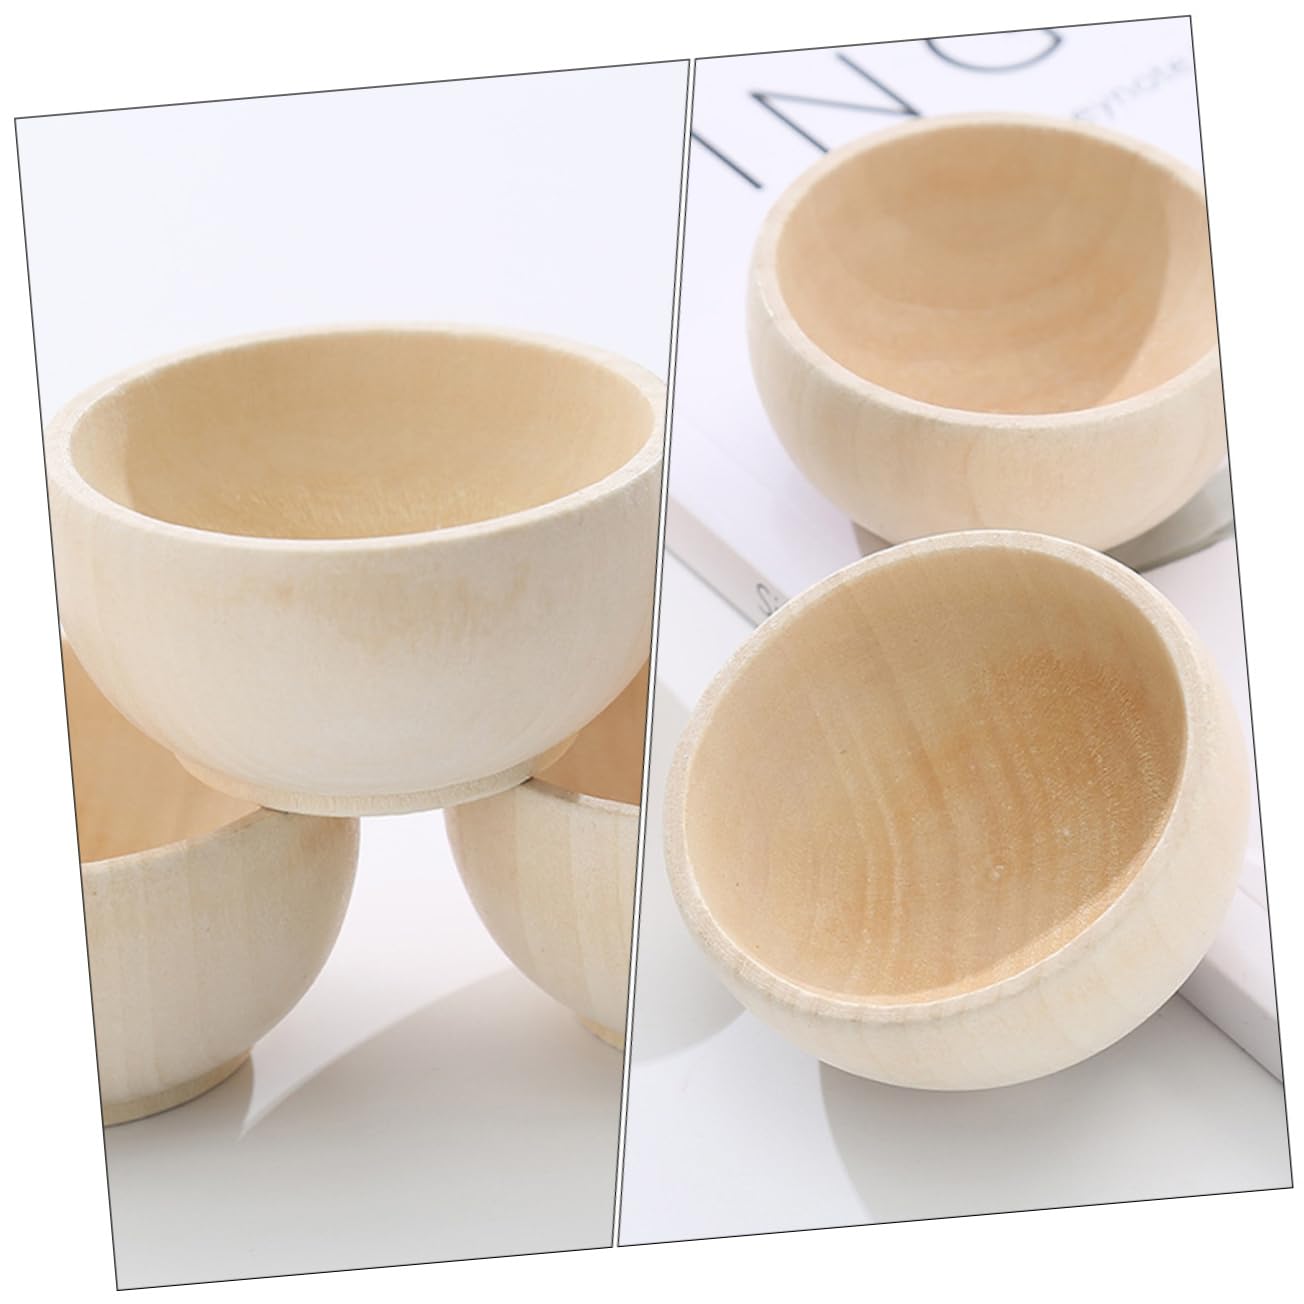 Abaodam 12 pcs small wooden bowl wooden crafts wooden cutlery dinnerware small wood bowls unfinished wood bowls wood bowl Delicate Wood Simulated